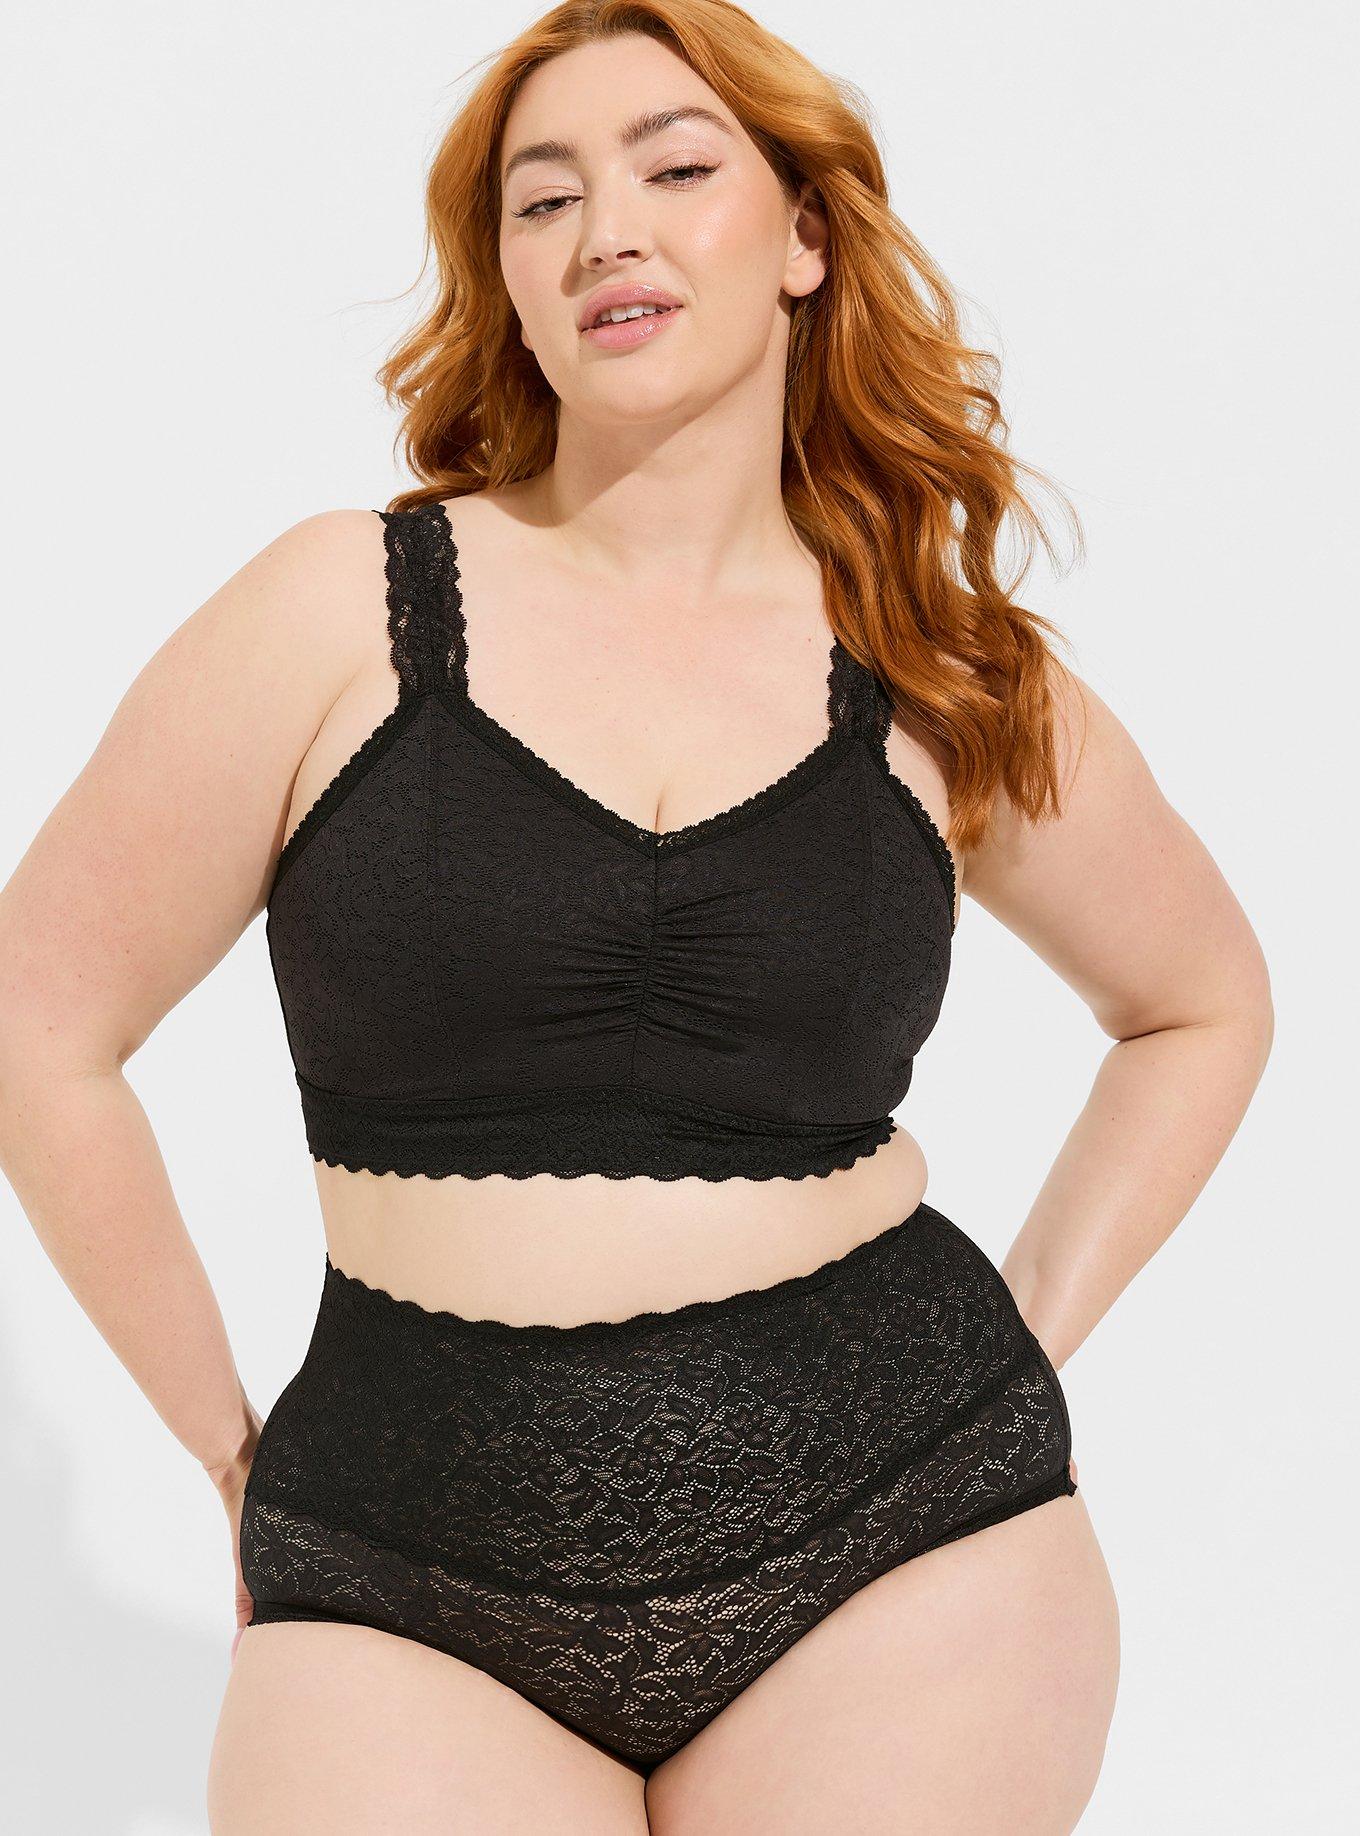 TORRID 4-Way Stretch Lace High-Rise Brief Panty